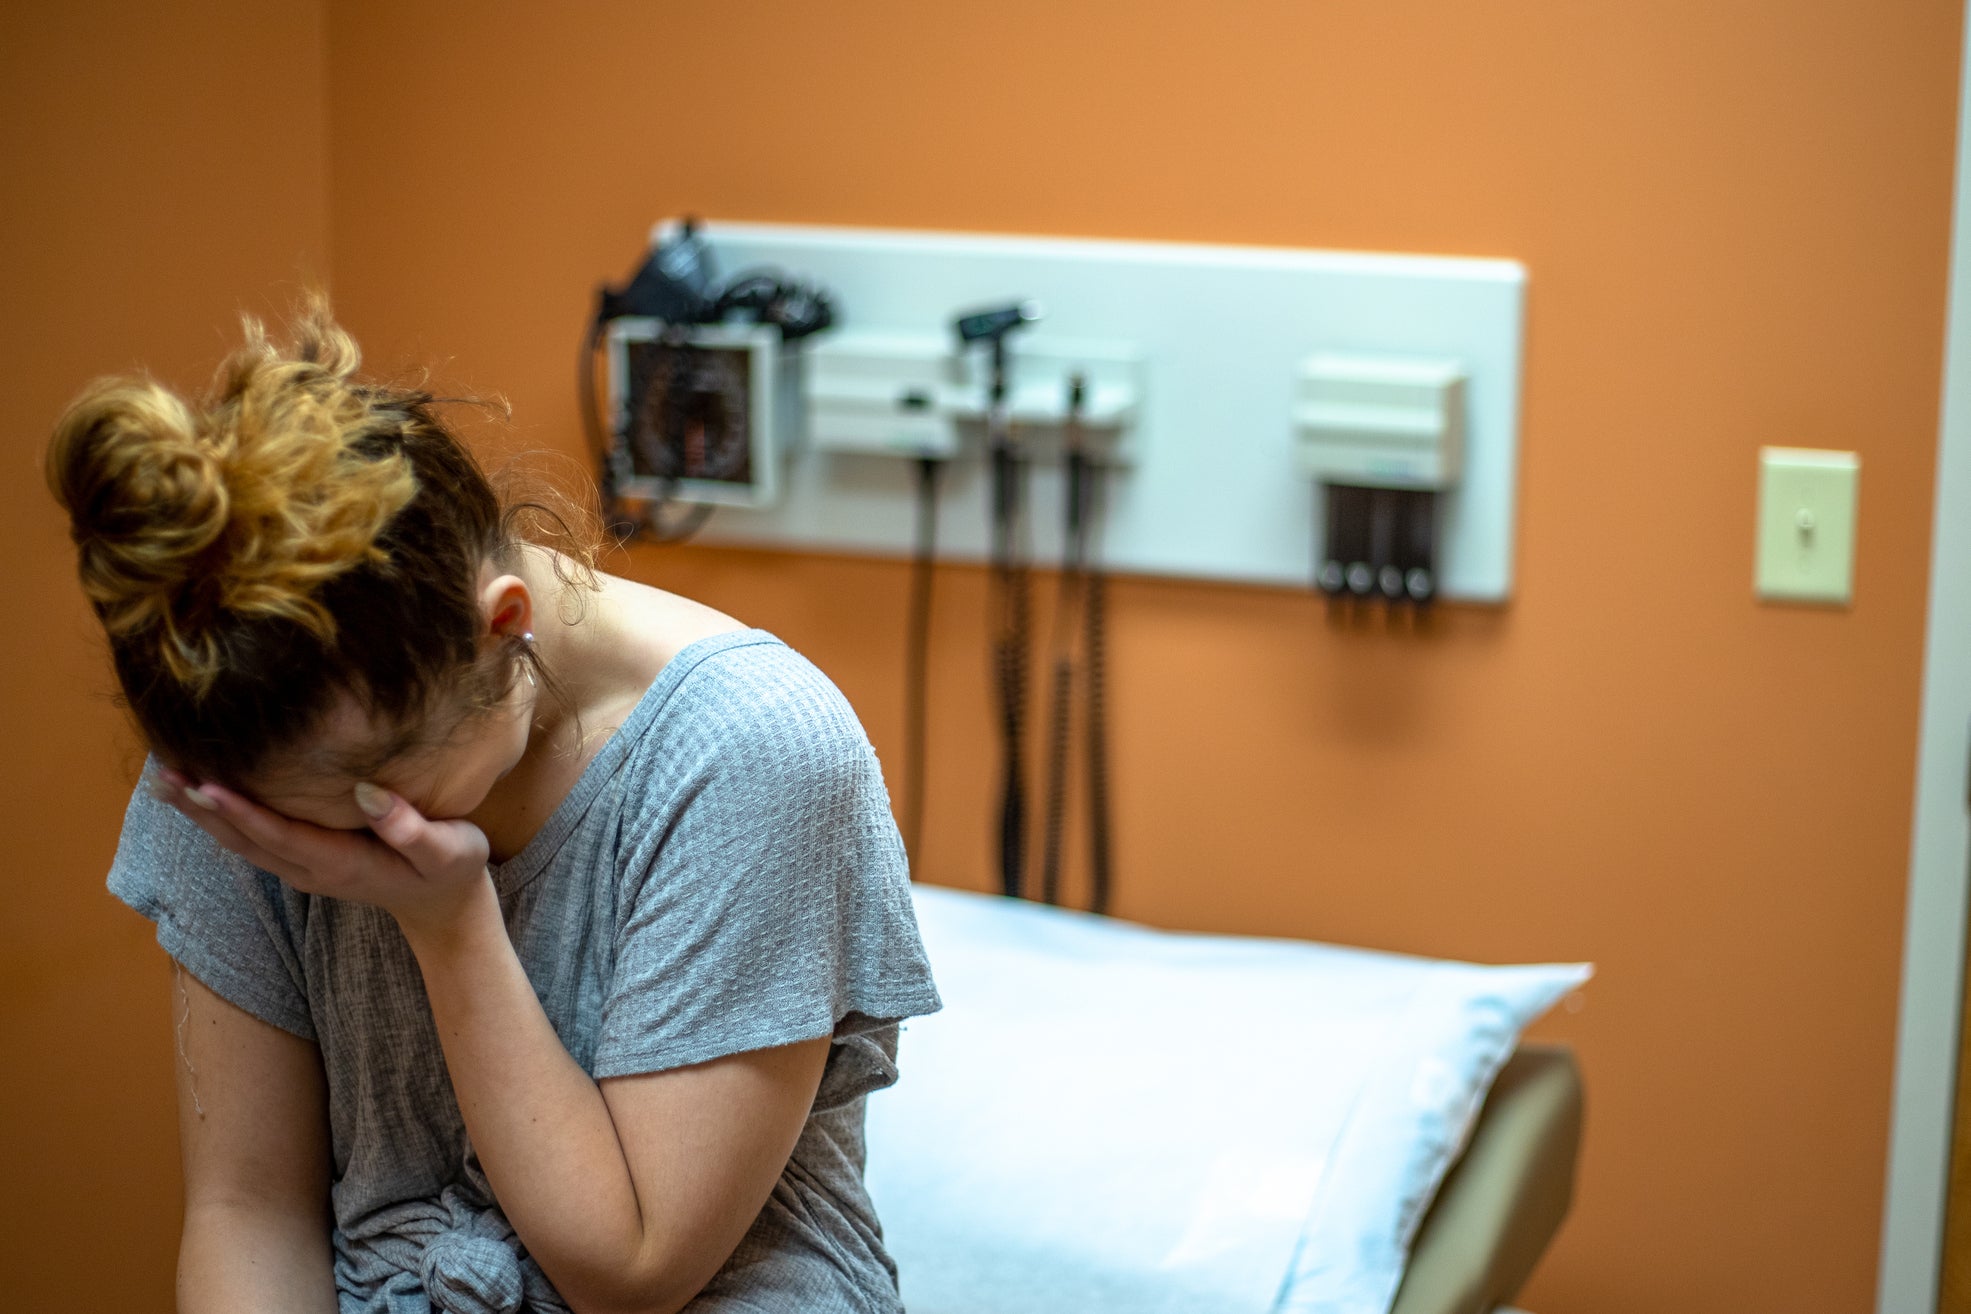 "You Are Blamed For Your Symptoms" — Experts Shared 5 Signs That Your Doctor Is Gaslighting You